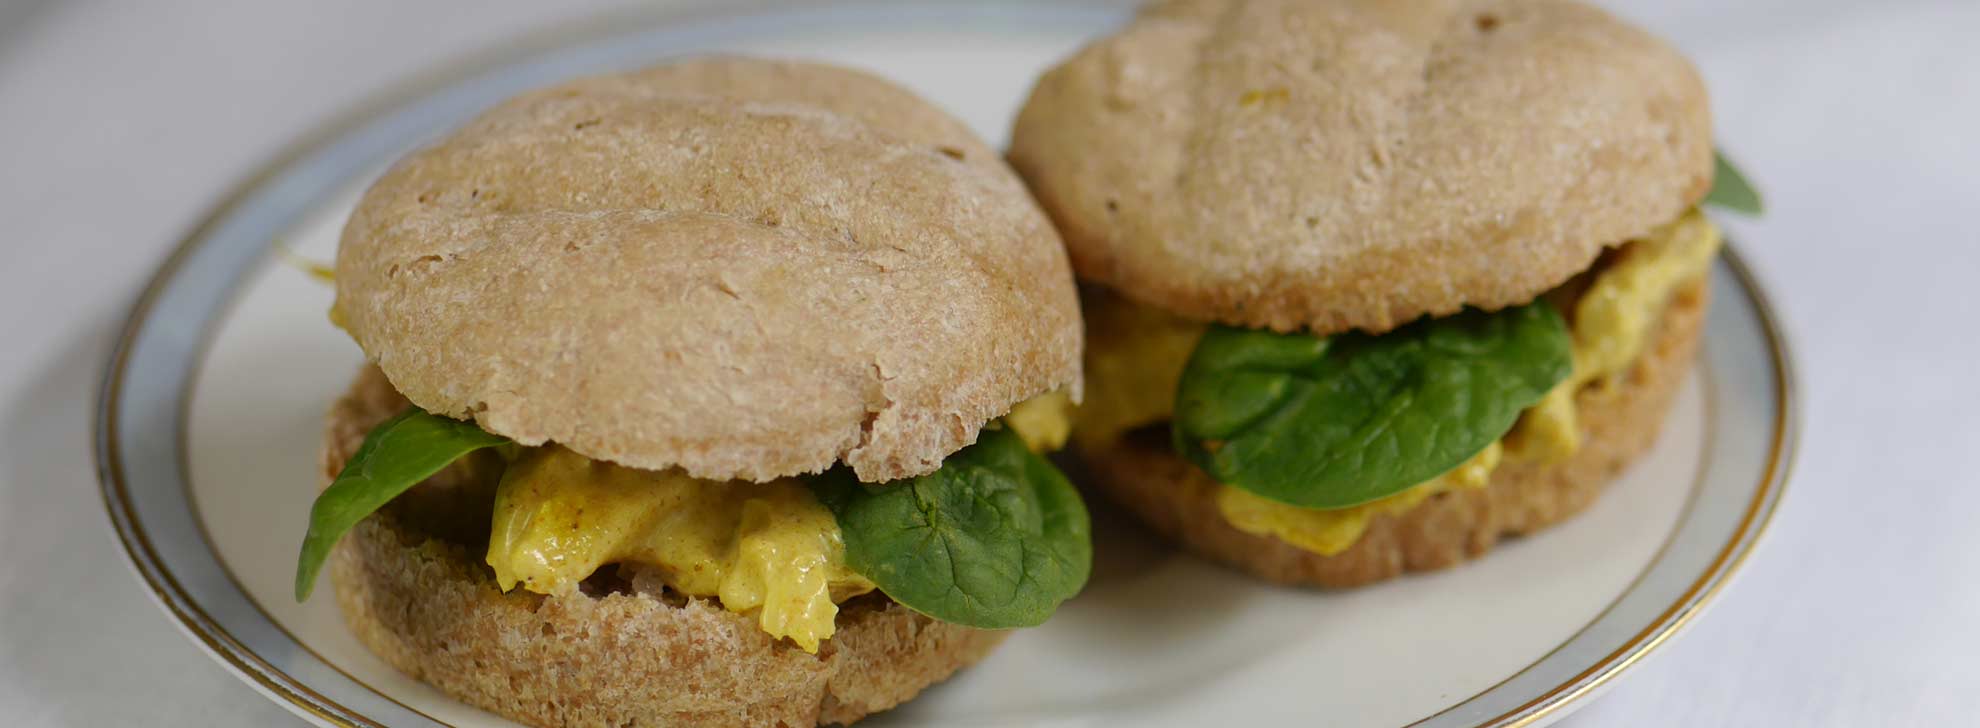 two small buns with curried chicken filling and baby spinach leaf garnish